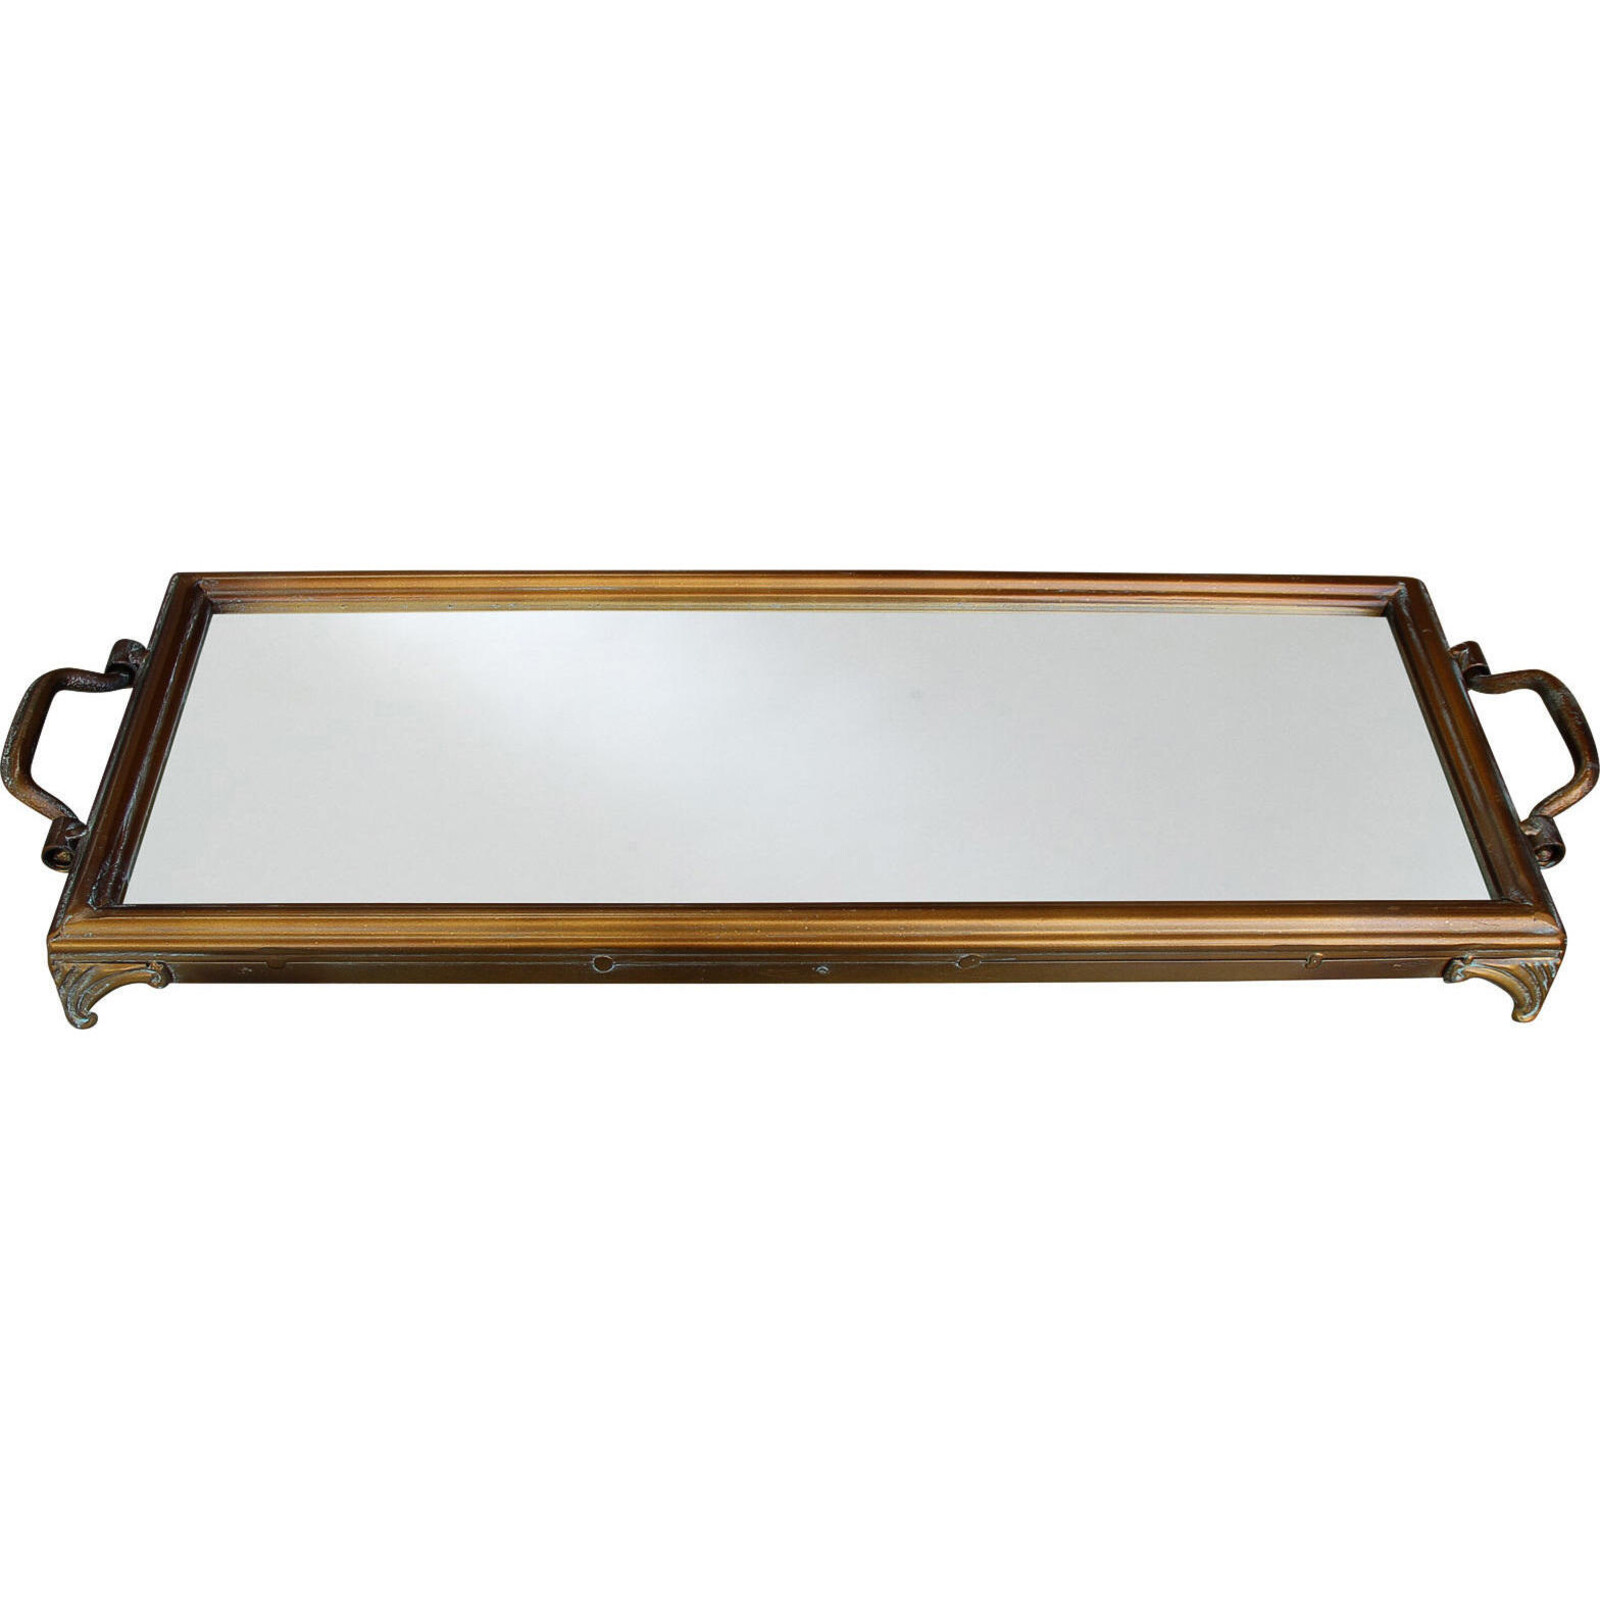 Tray Rect Antique Brass